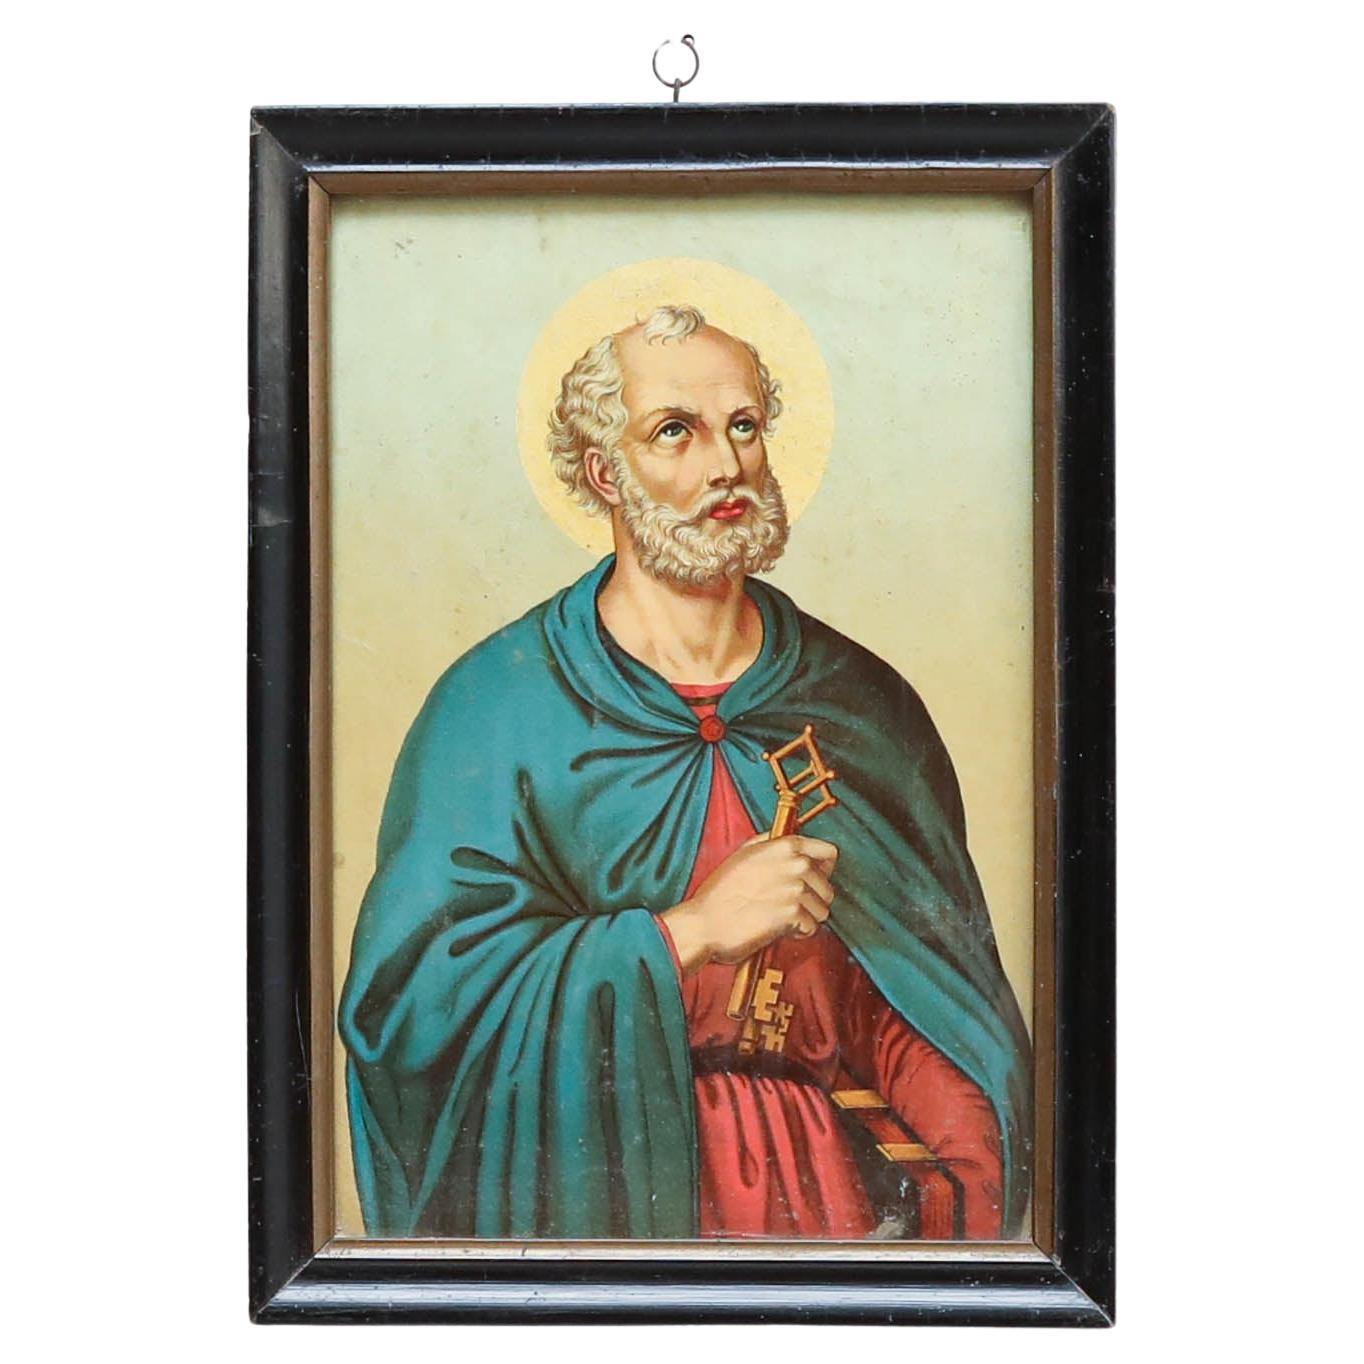 Framed Print of Saint Peter by Unknown Artist, circa 1940 